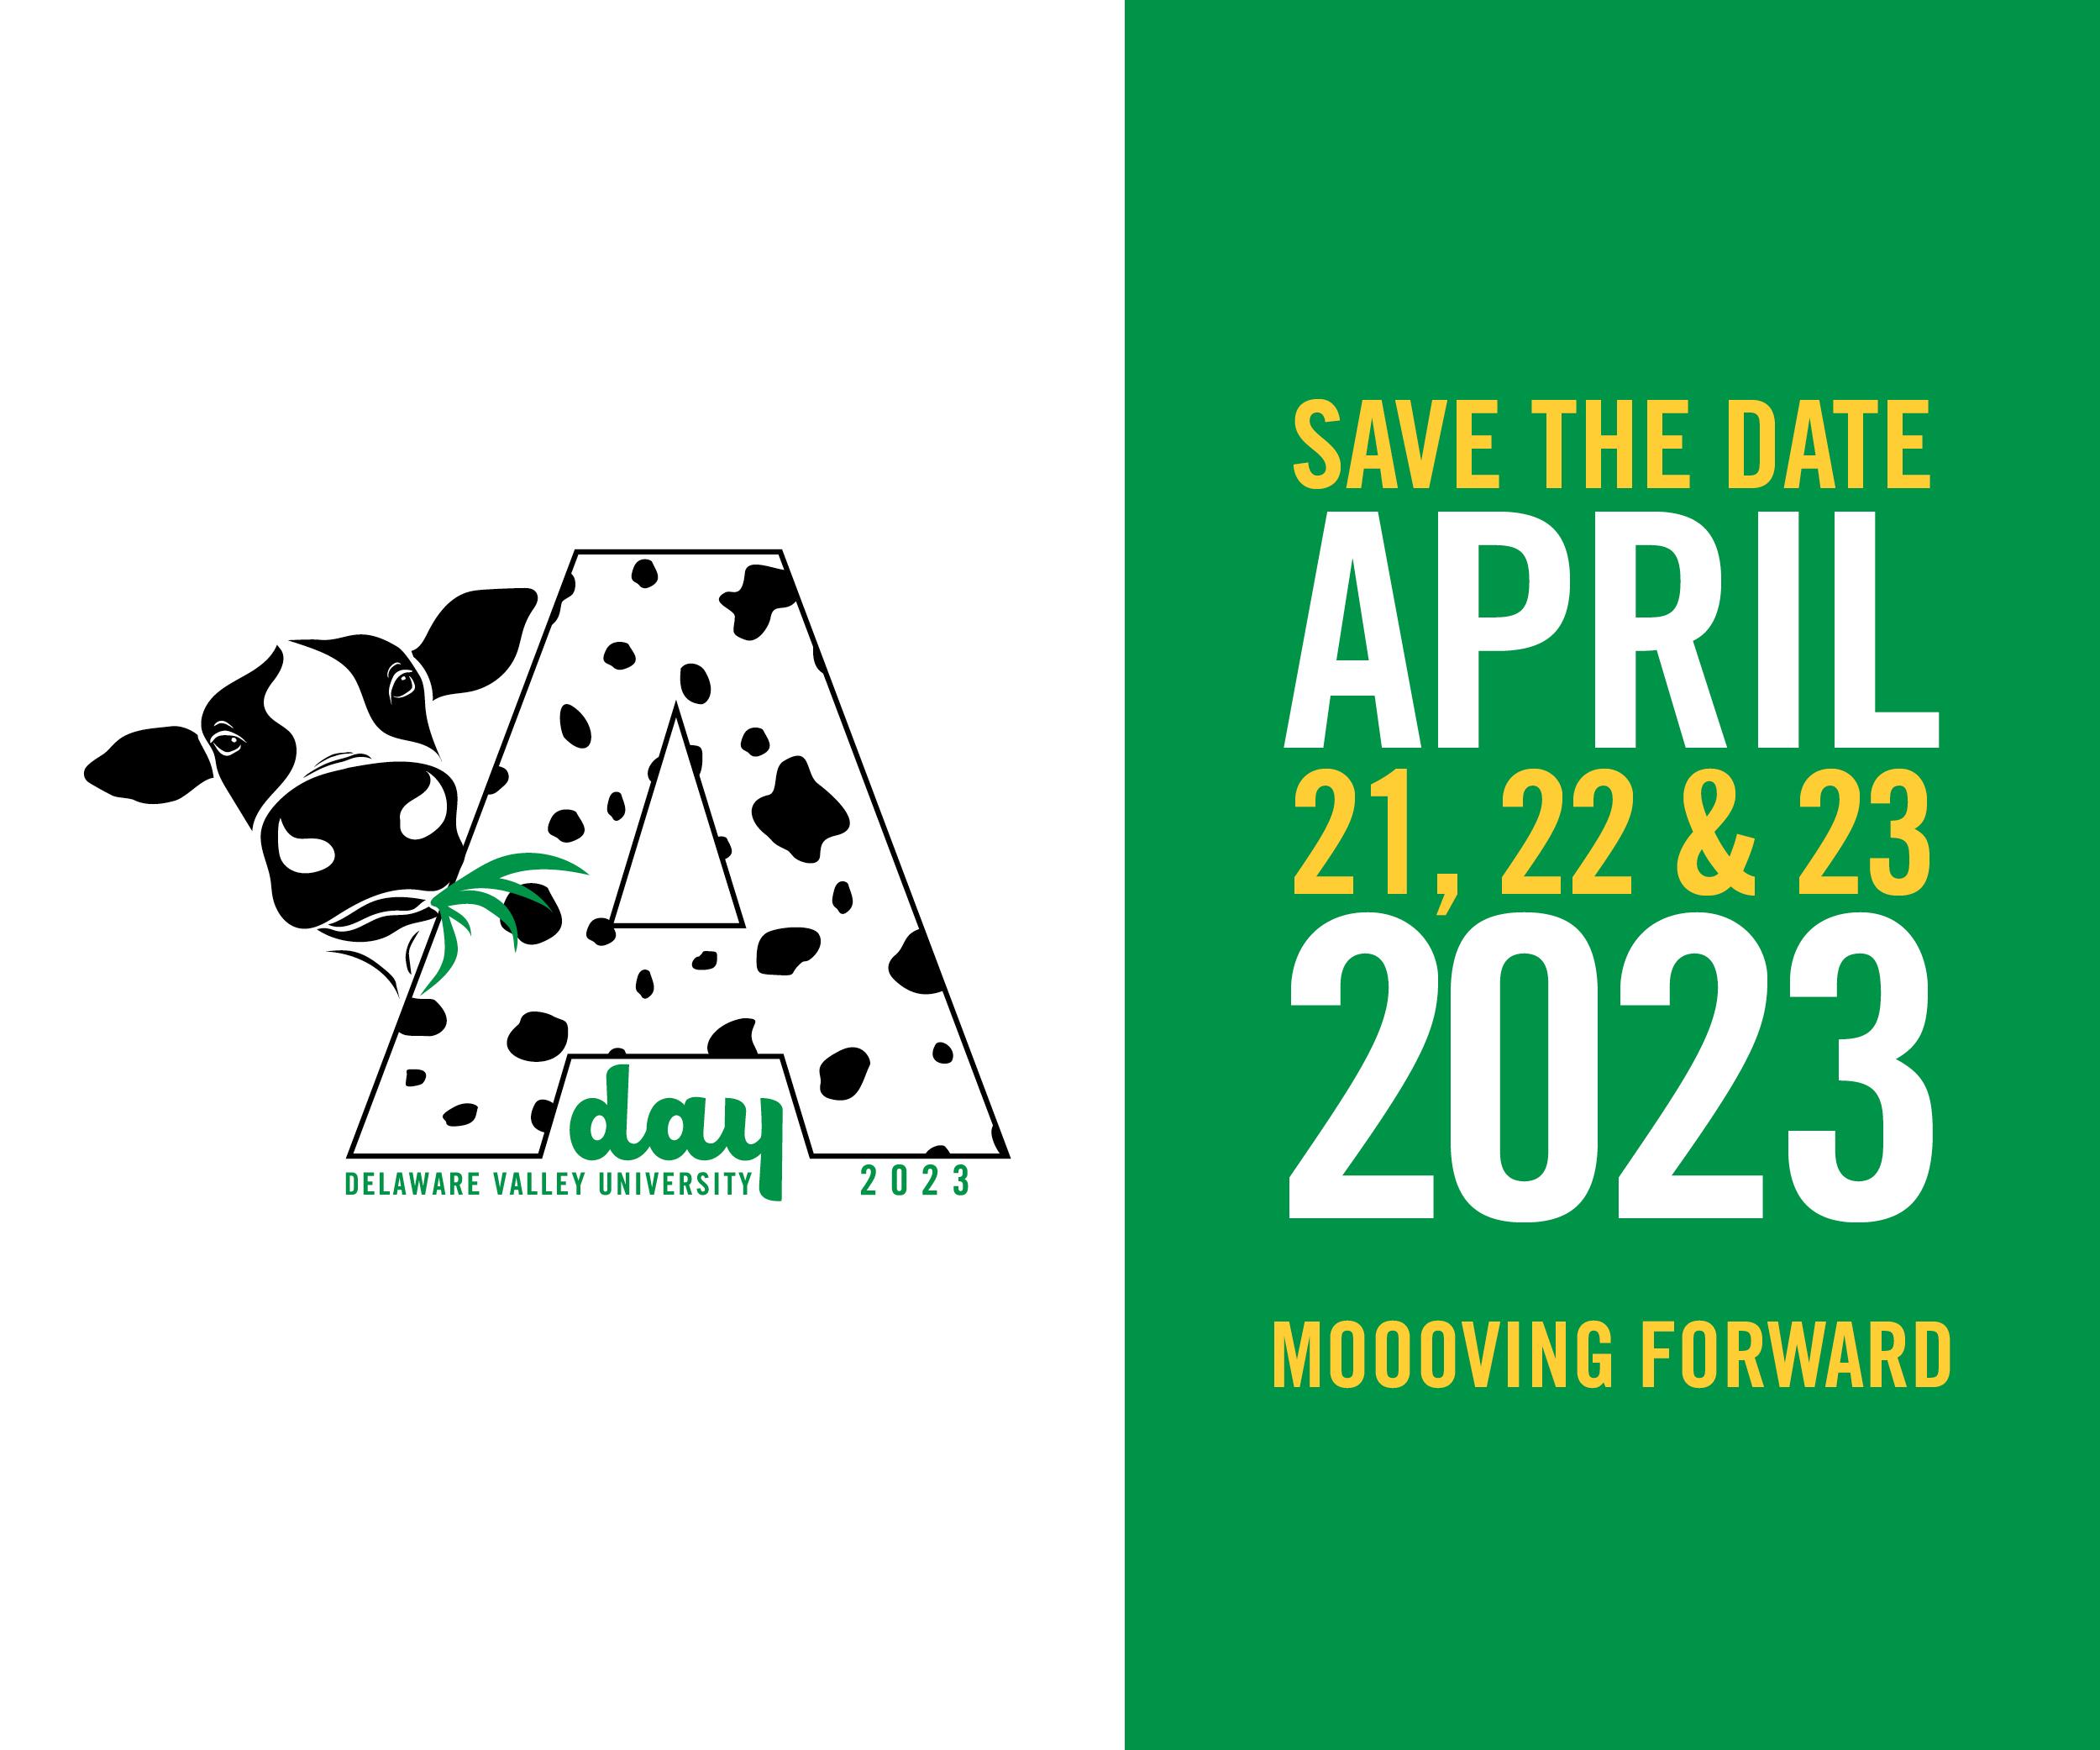 A-Day save the date -- April 21, 22, & 23, 2023